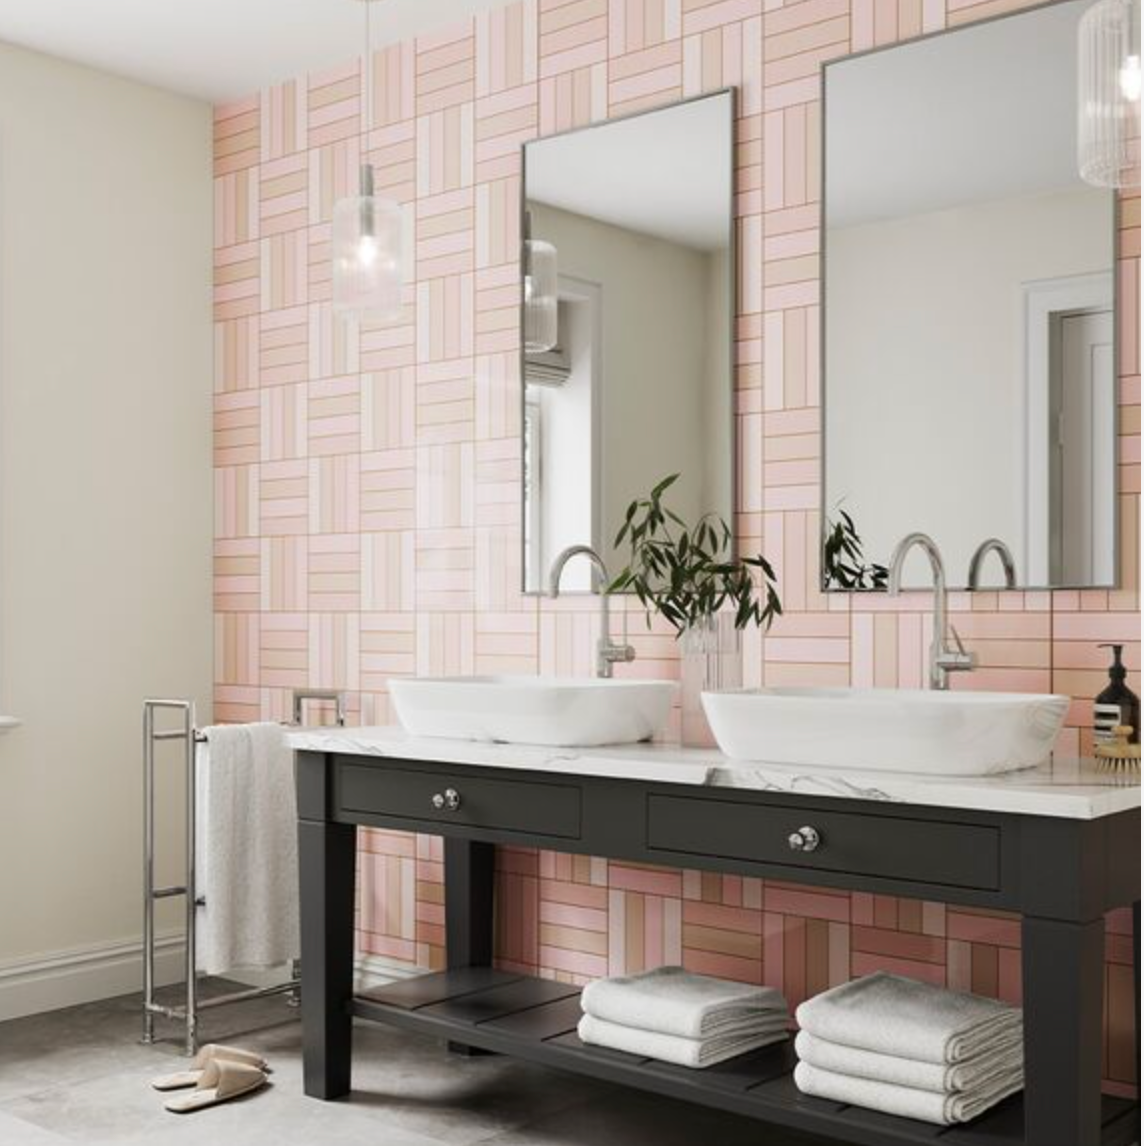 Showerwall Acrylic Patterns & Tiles Collection  - Square Parquet Marshmallow